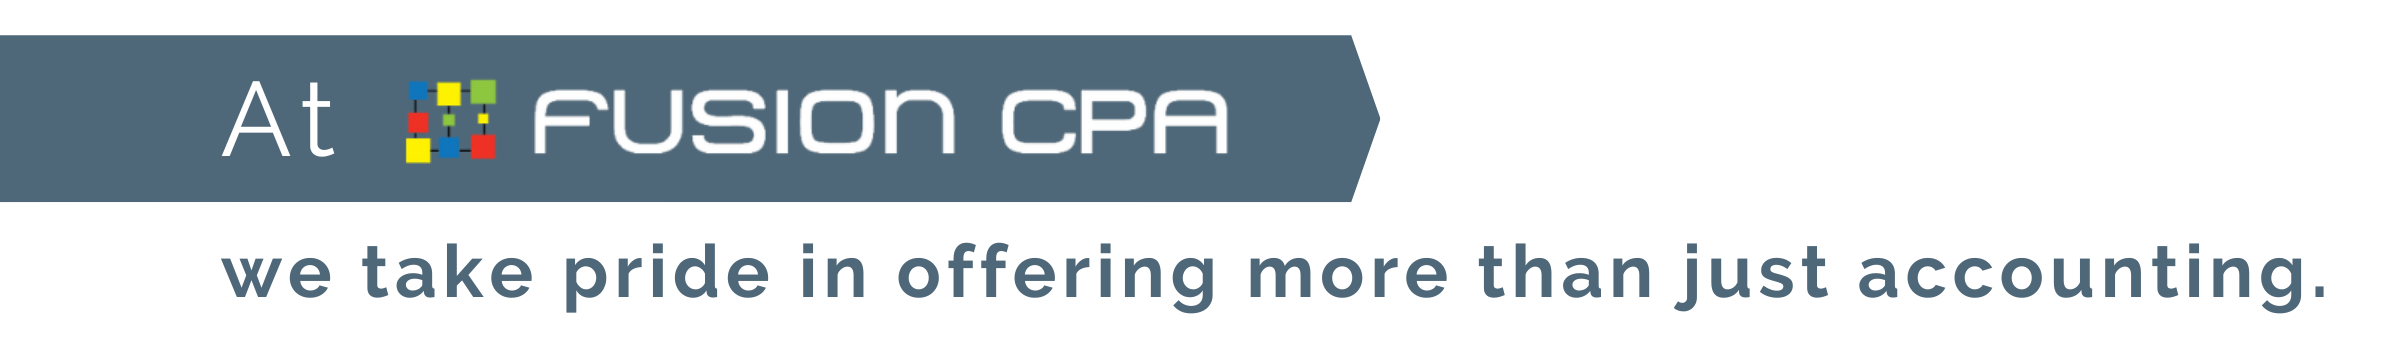 At Fusion CPA, we take pride in offering more than just accounting.